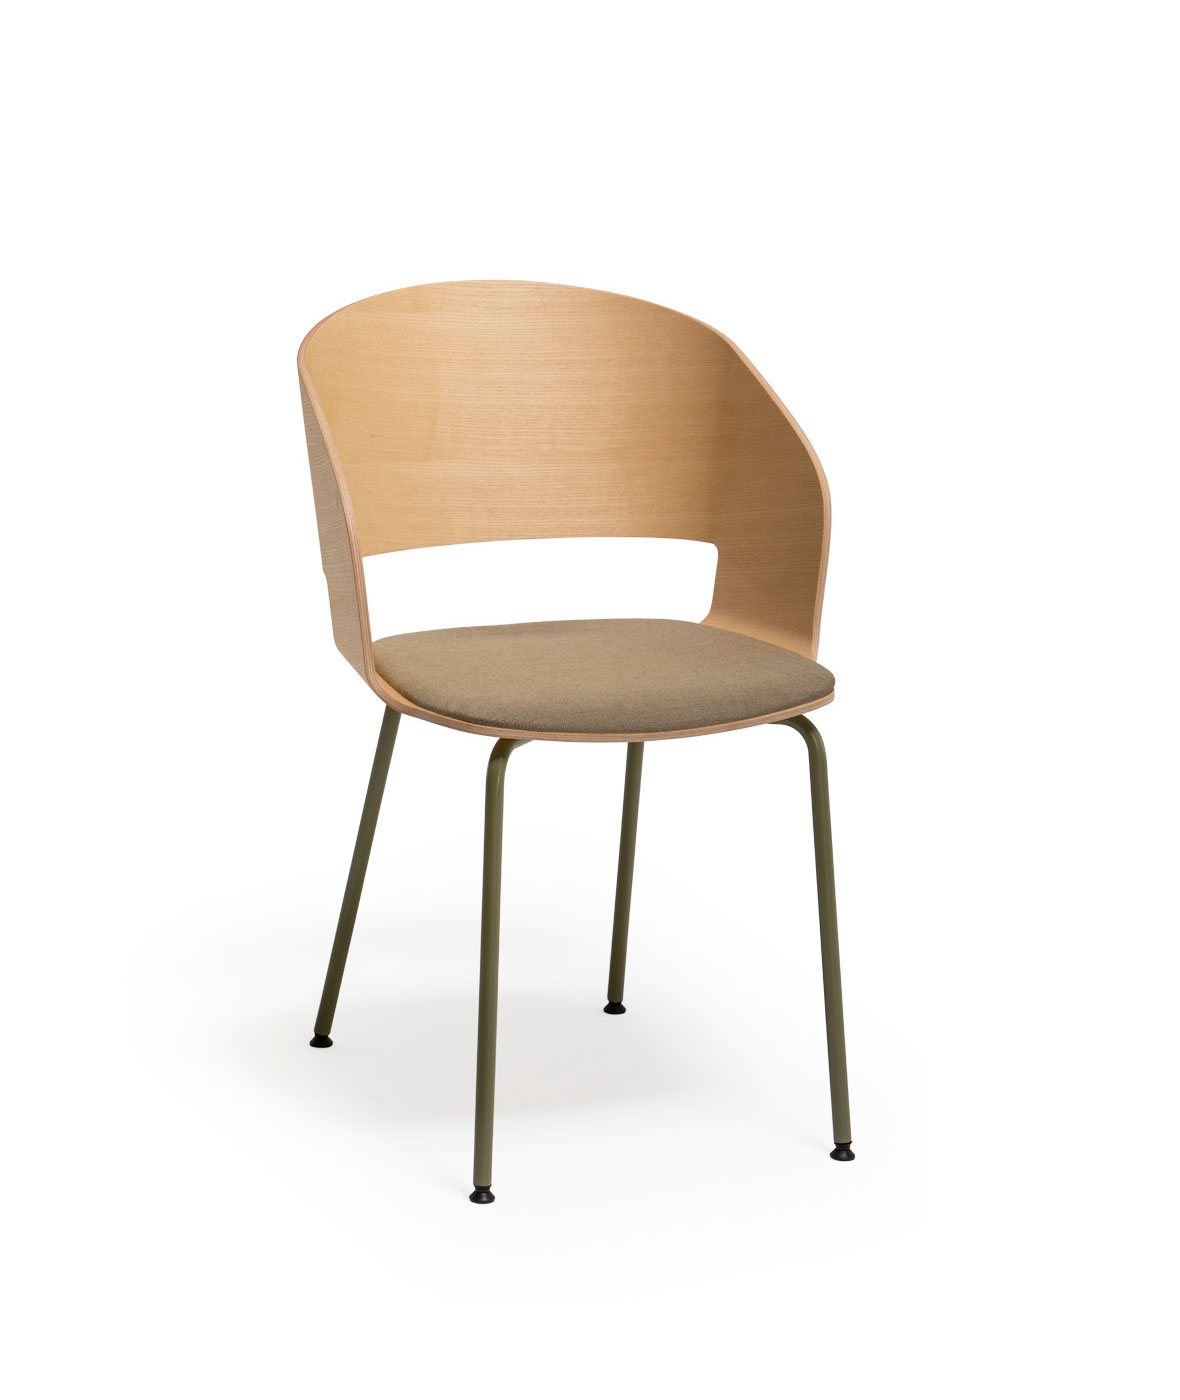 Goose chair Model A with metallic armrests and legs - Vergés